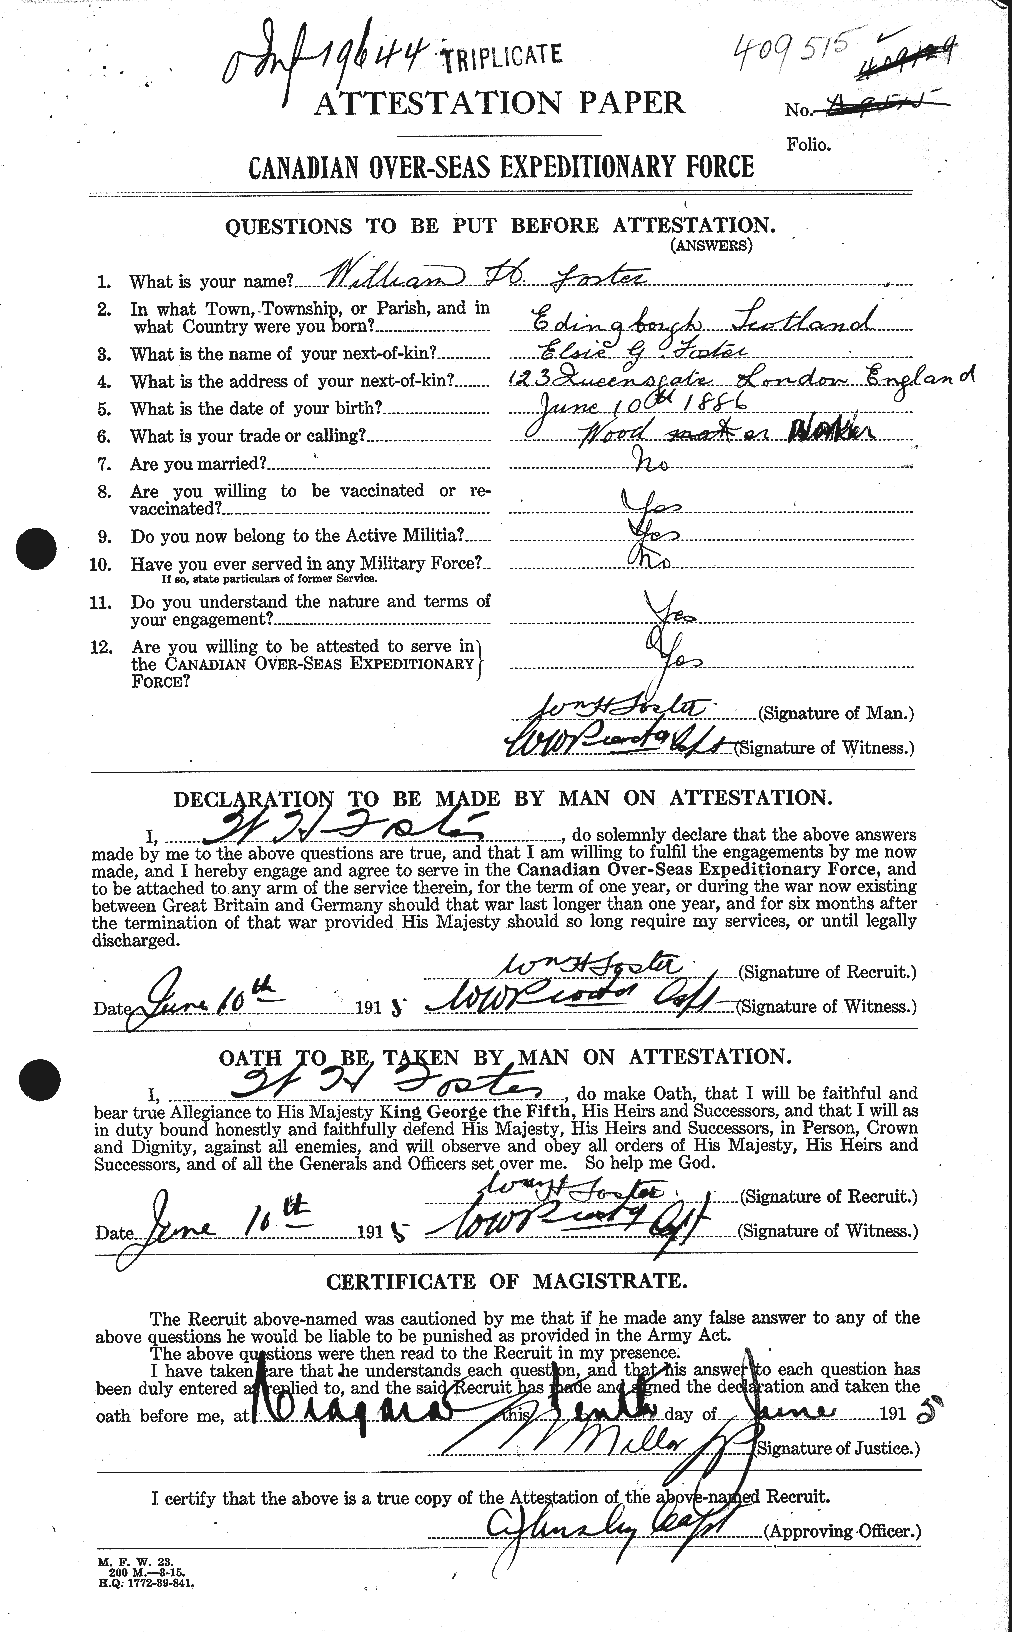 Personnel Records of the First World War - CEF 328748a